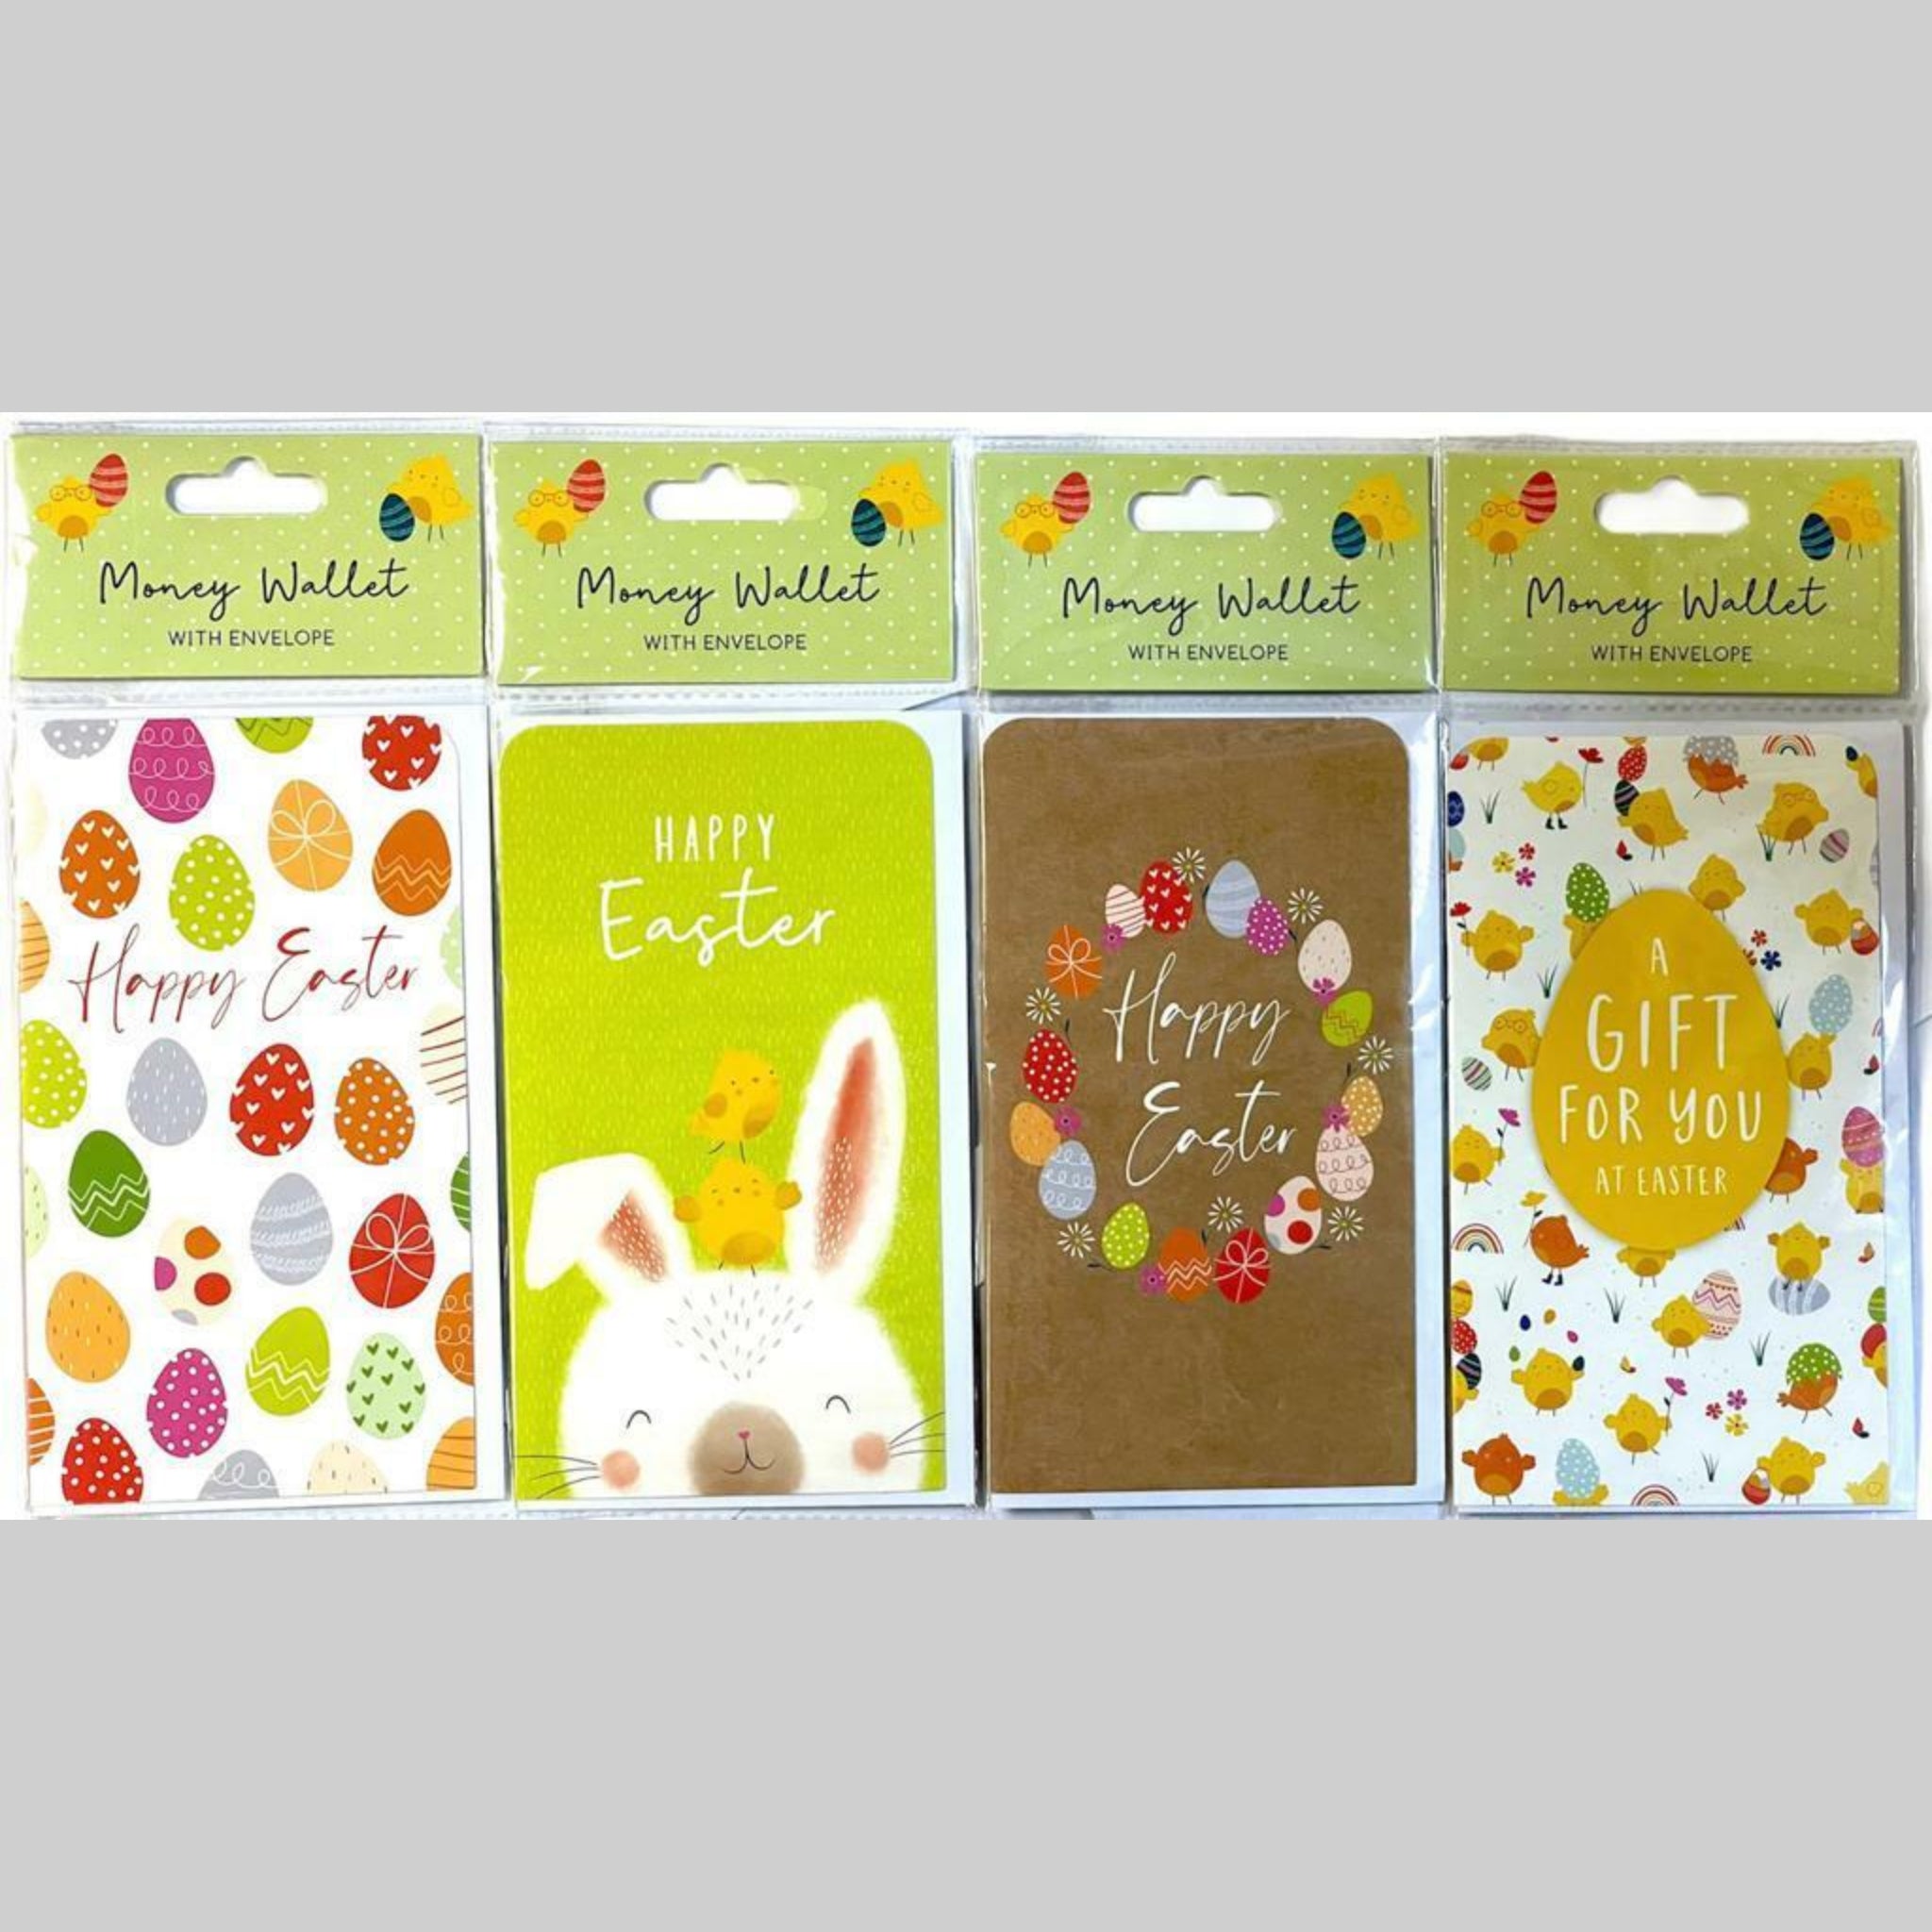 Beclen Harp 4 Pack Luxury Traditional Easter Money Voucher Wallet Gift Card Holder With Envelope-Assorted Design For All Age